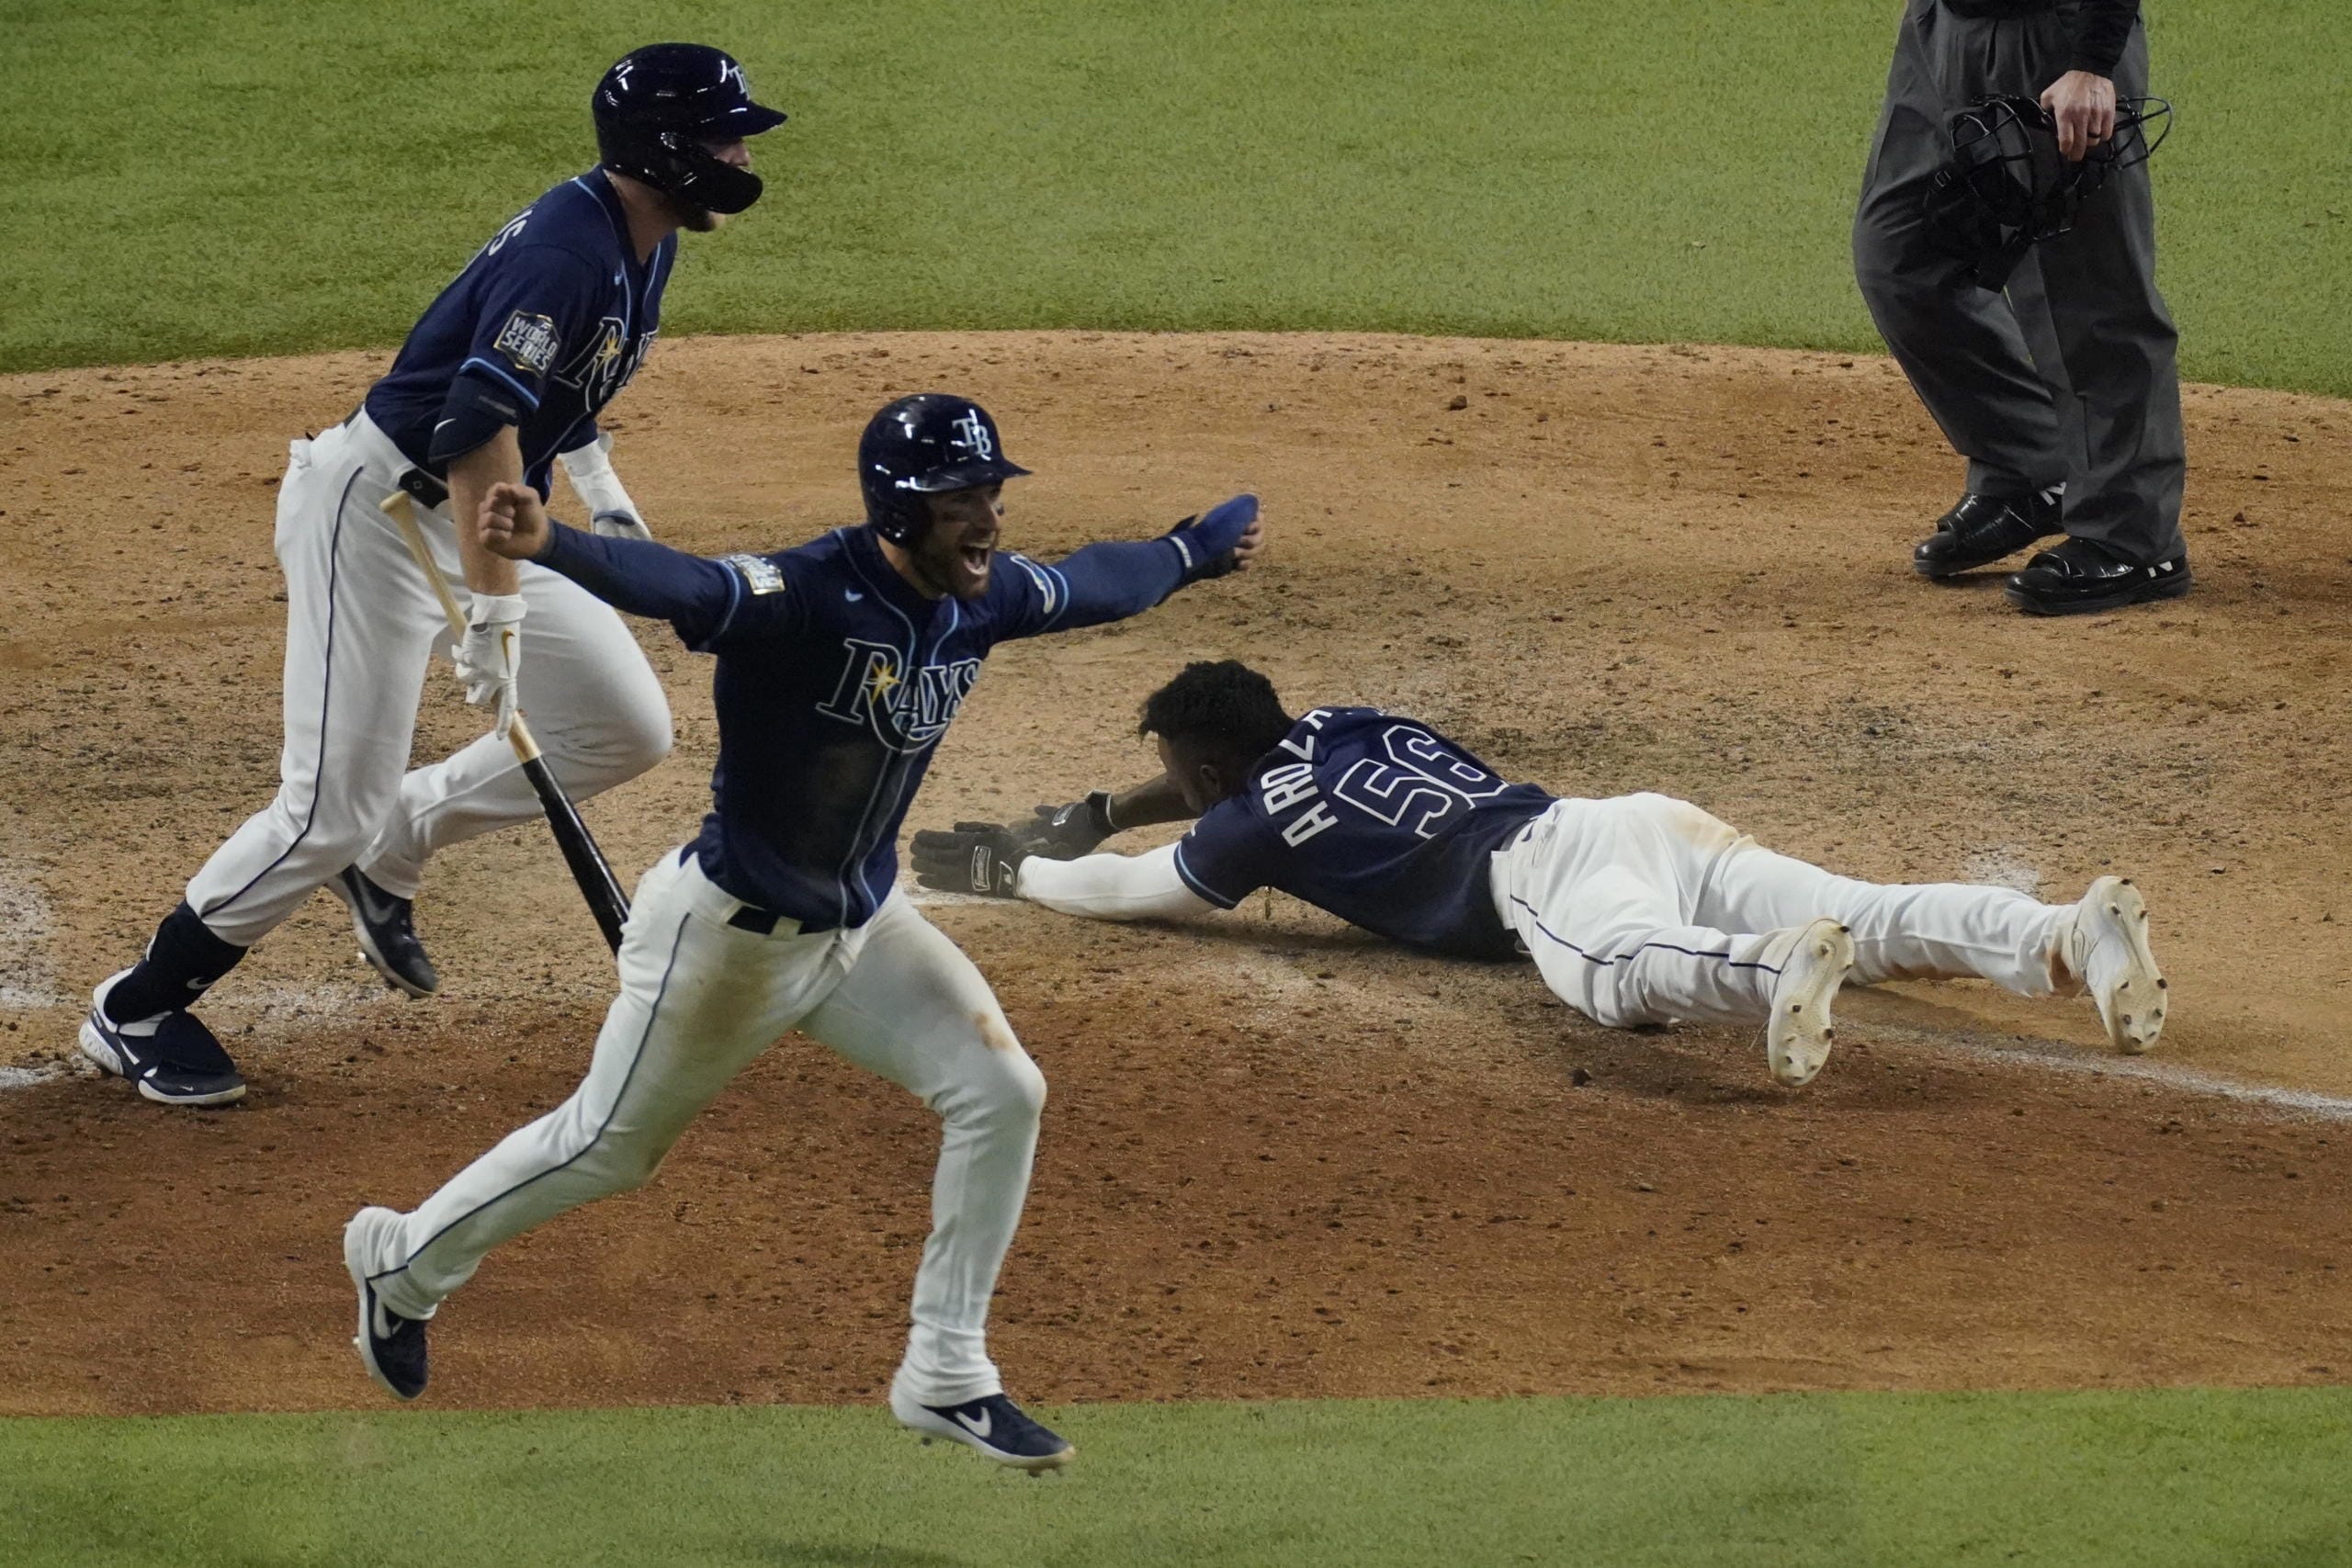 Stumbling stunner! Rays shock Dodgers in 9th, tie Series 2-2 - The Columbian